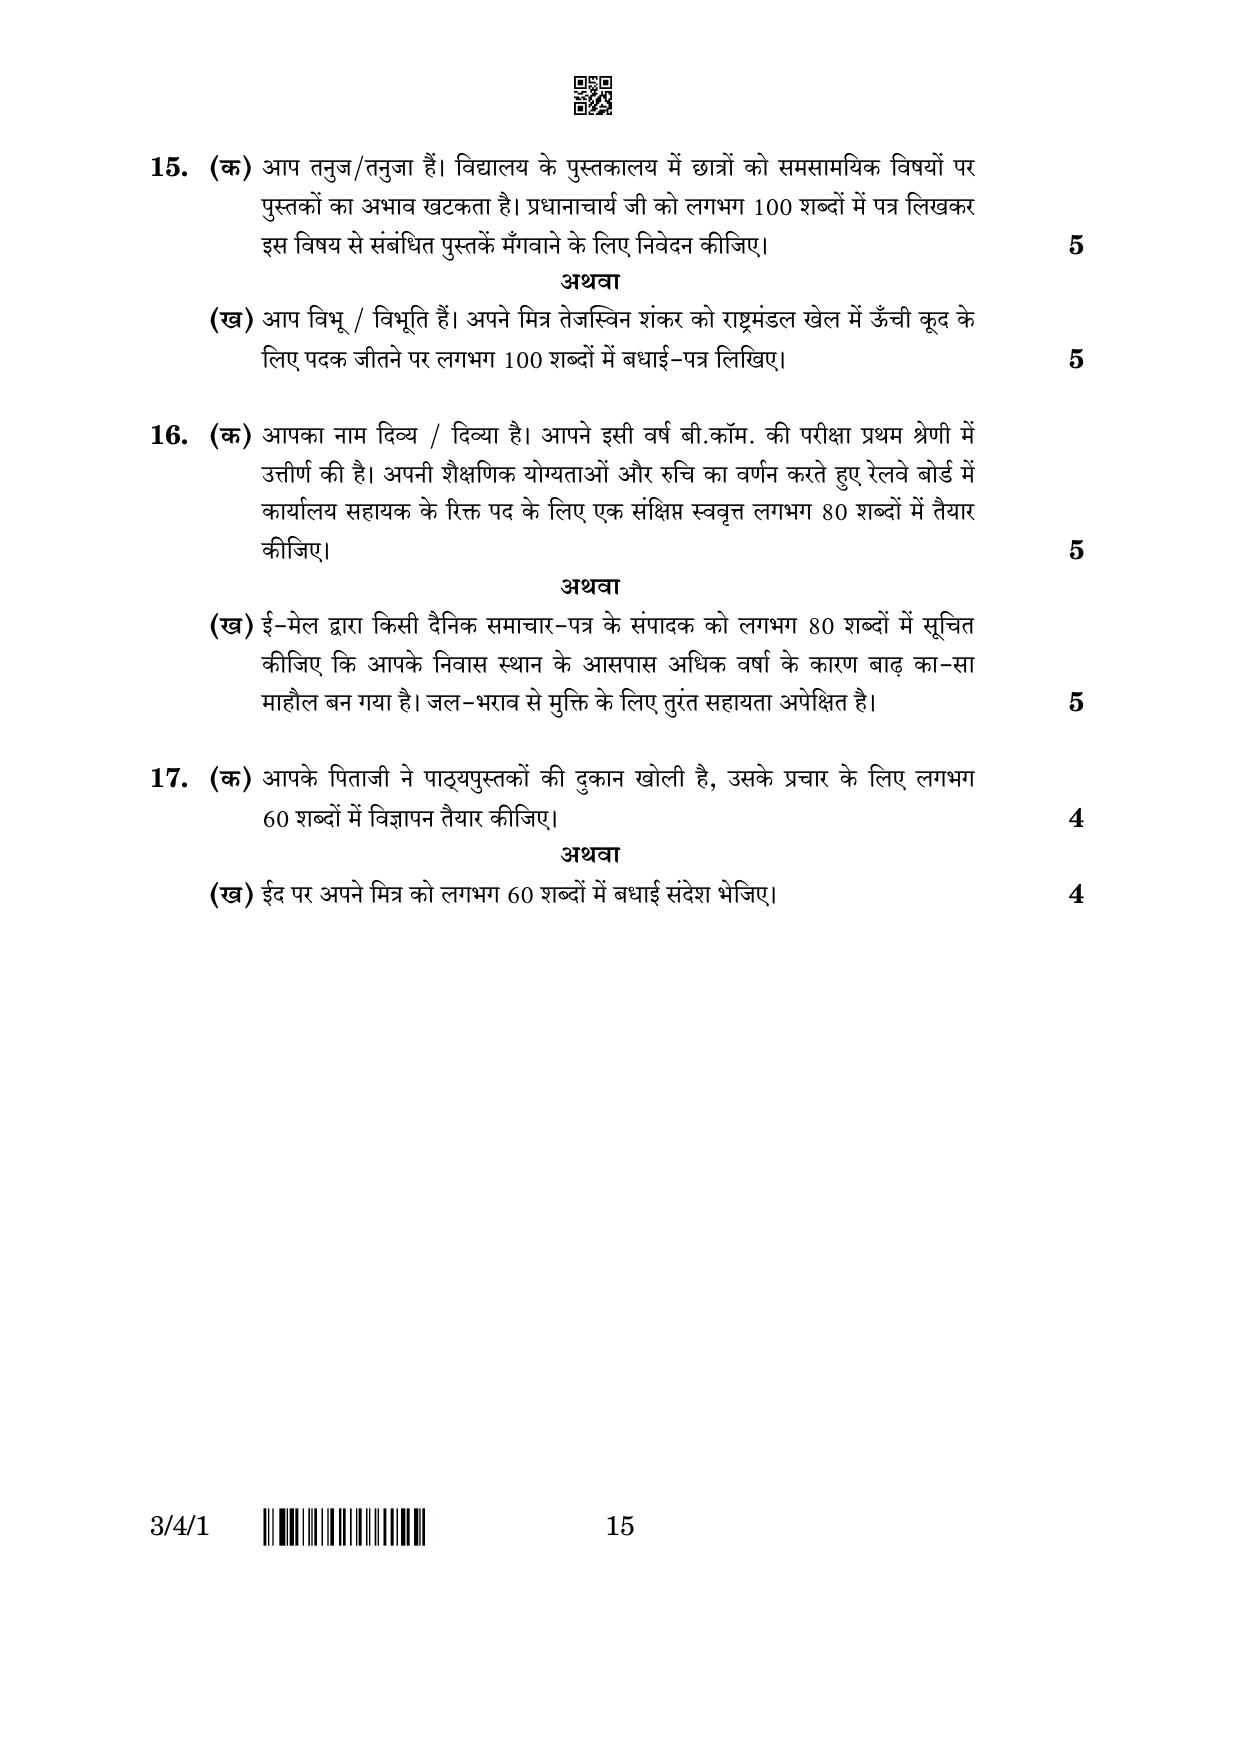 CBSE Class 10 3-4-1 Hindi A 2023 Question Paper - Page 15